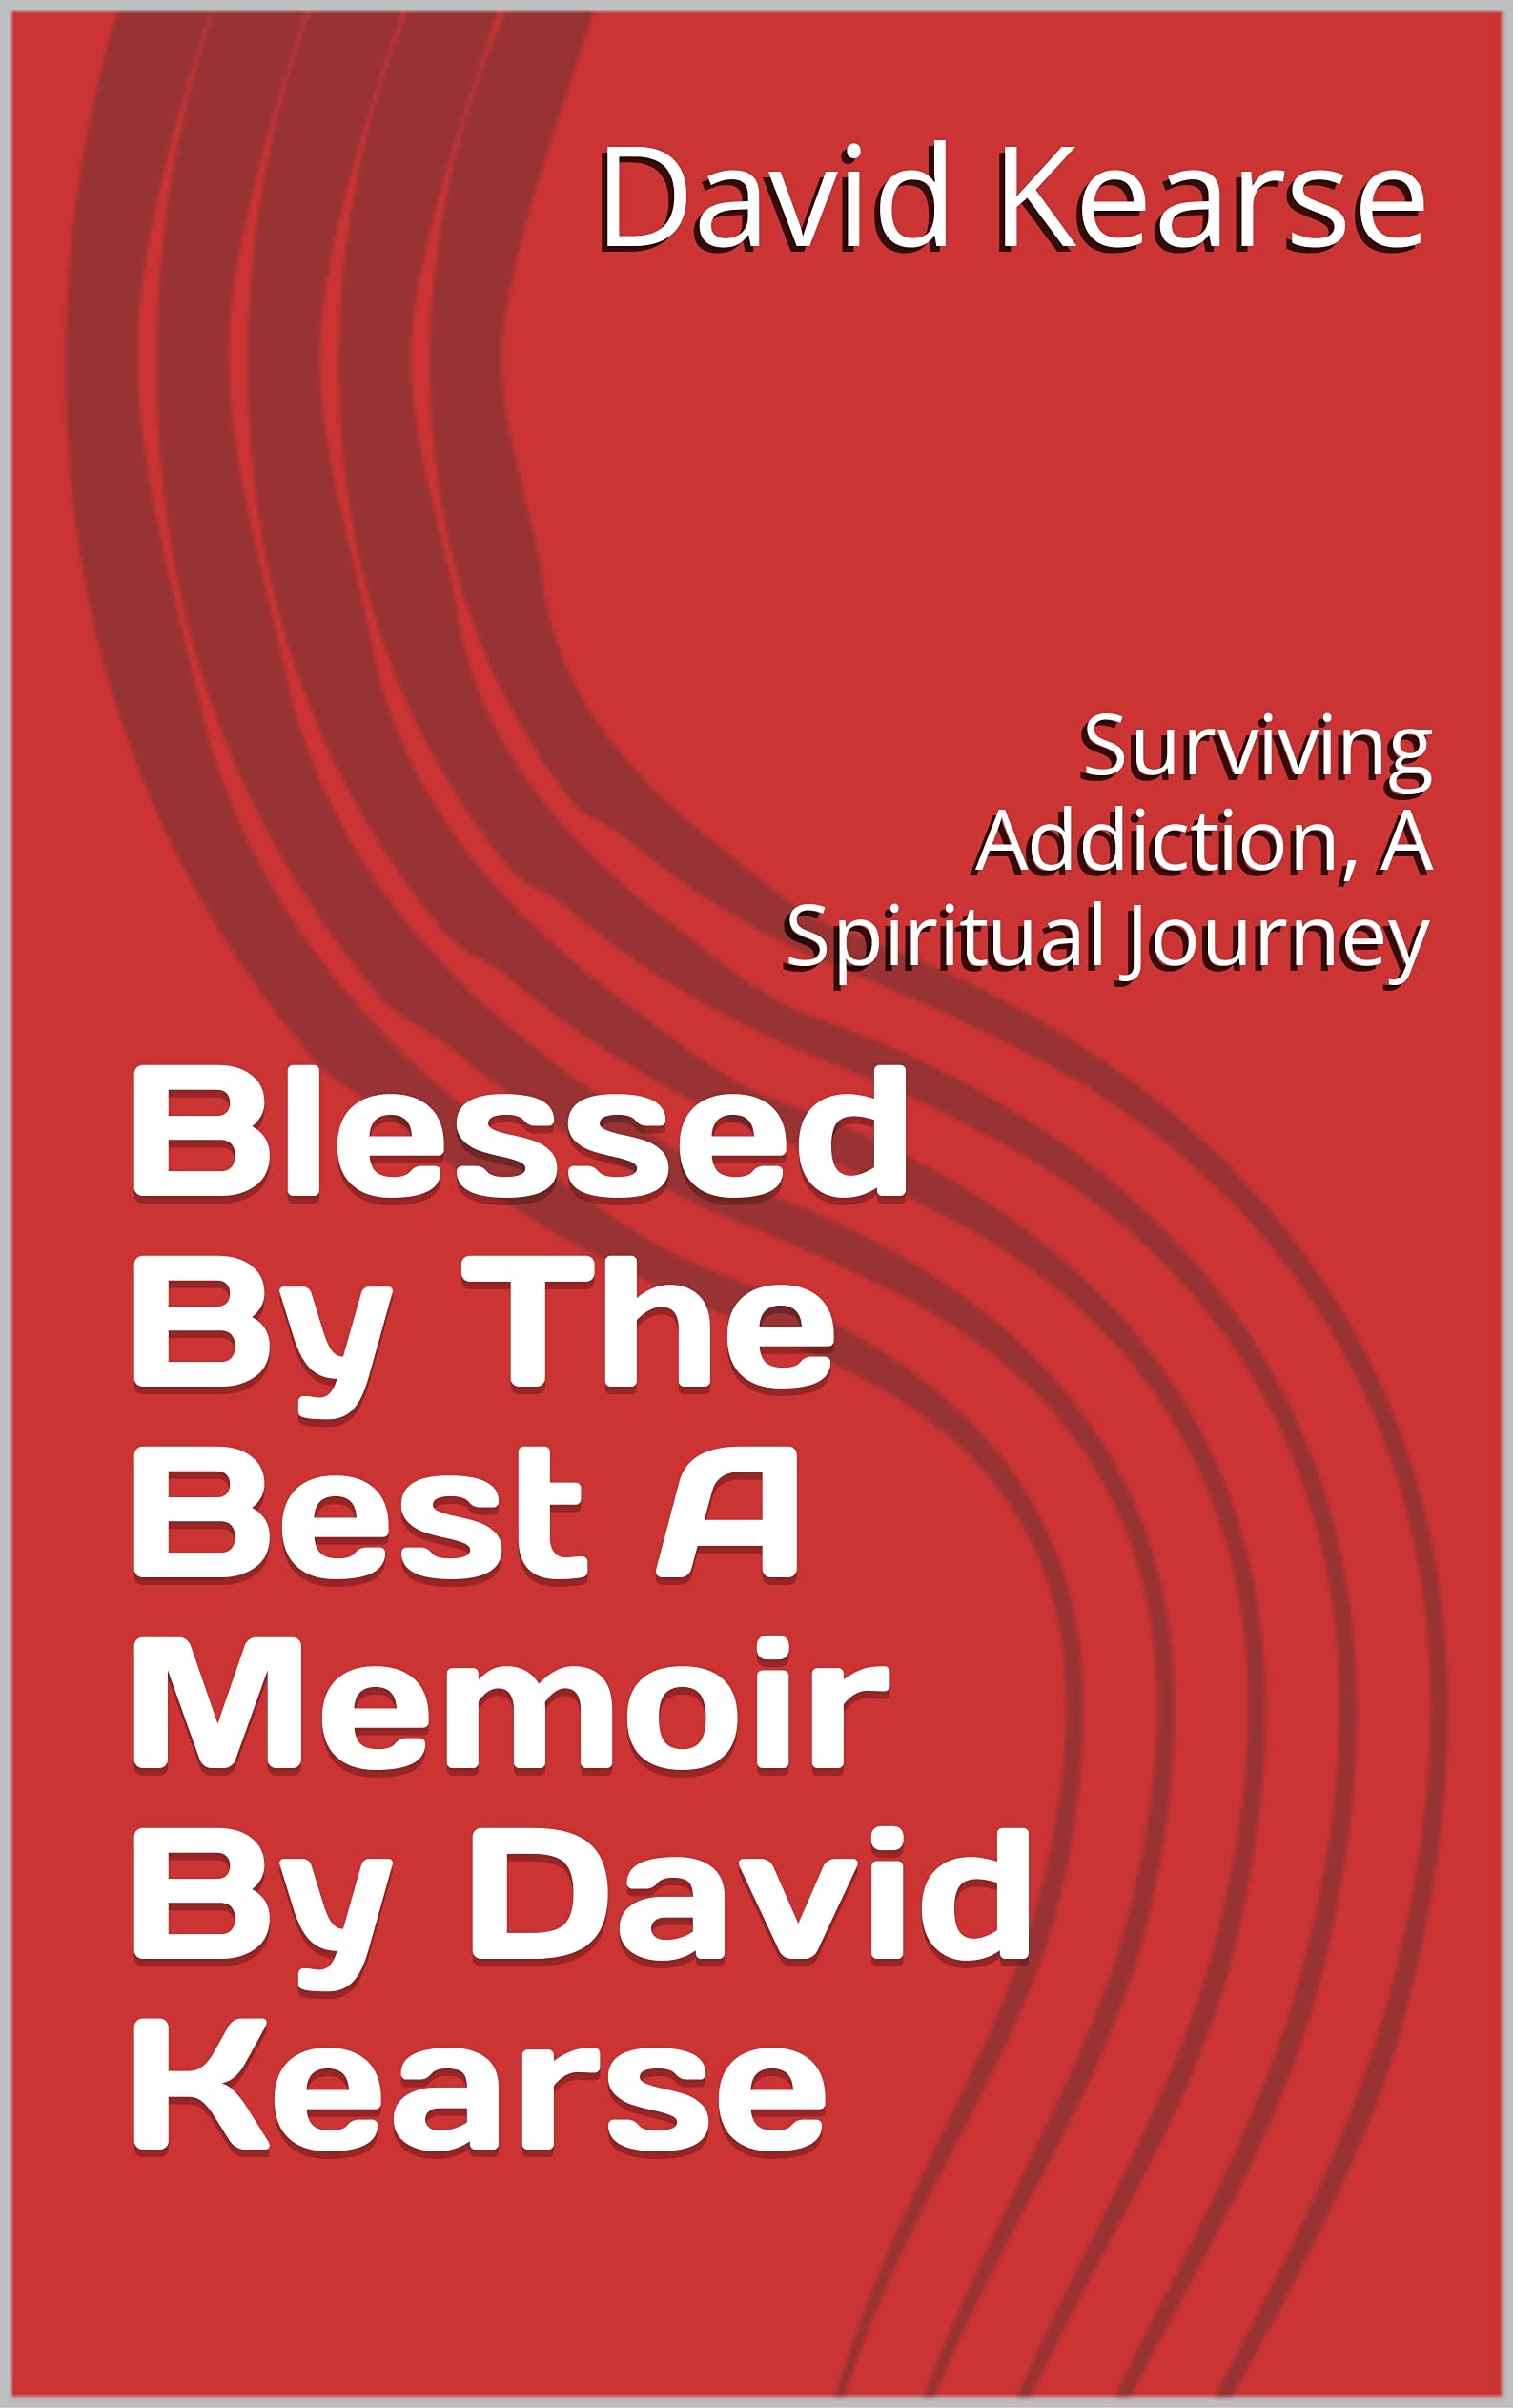 Blessed By The Best A Memoir By David Kearse: Surviving Addiction, A Spiritual Journey